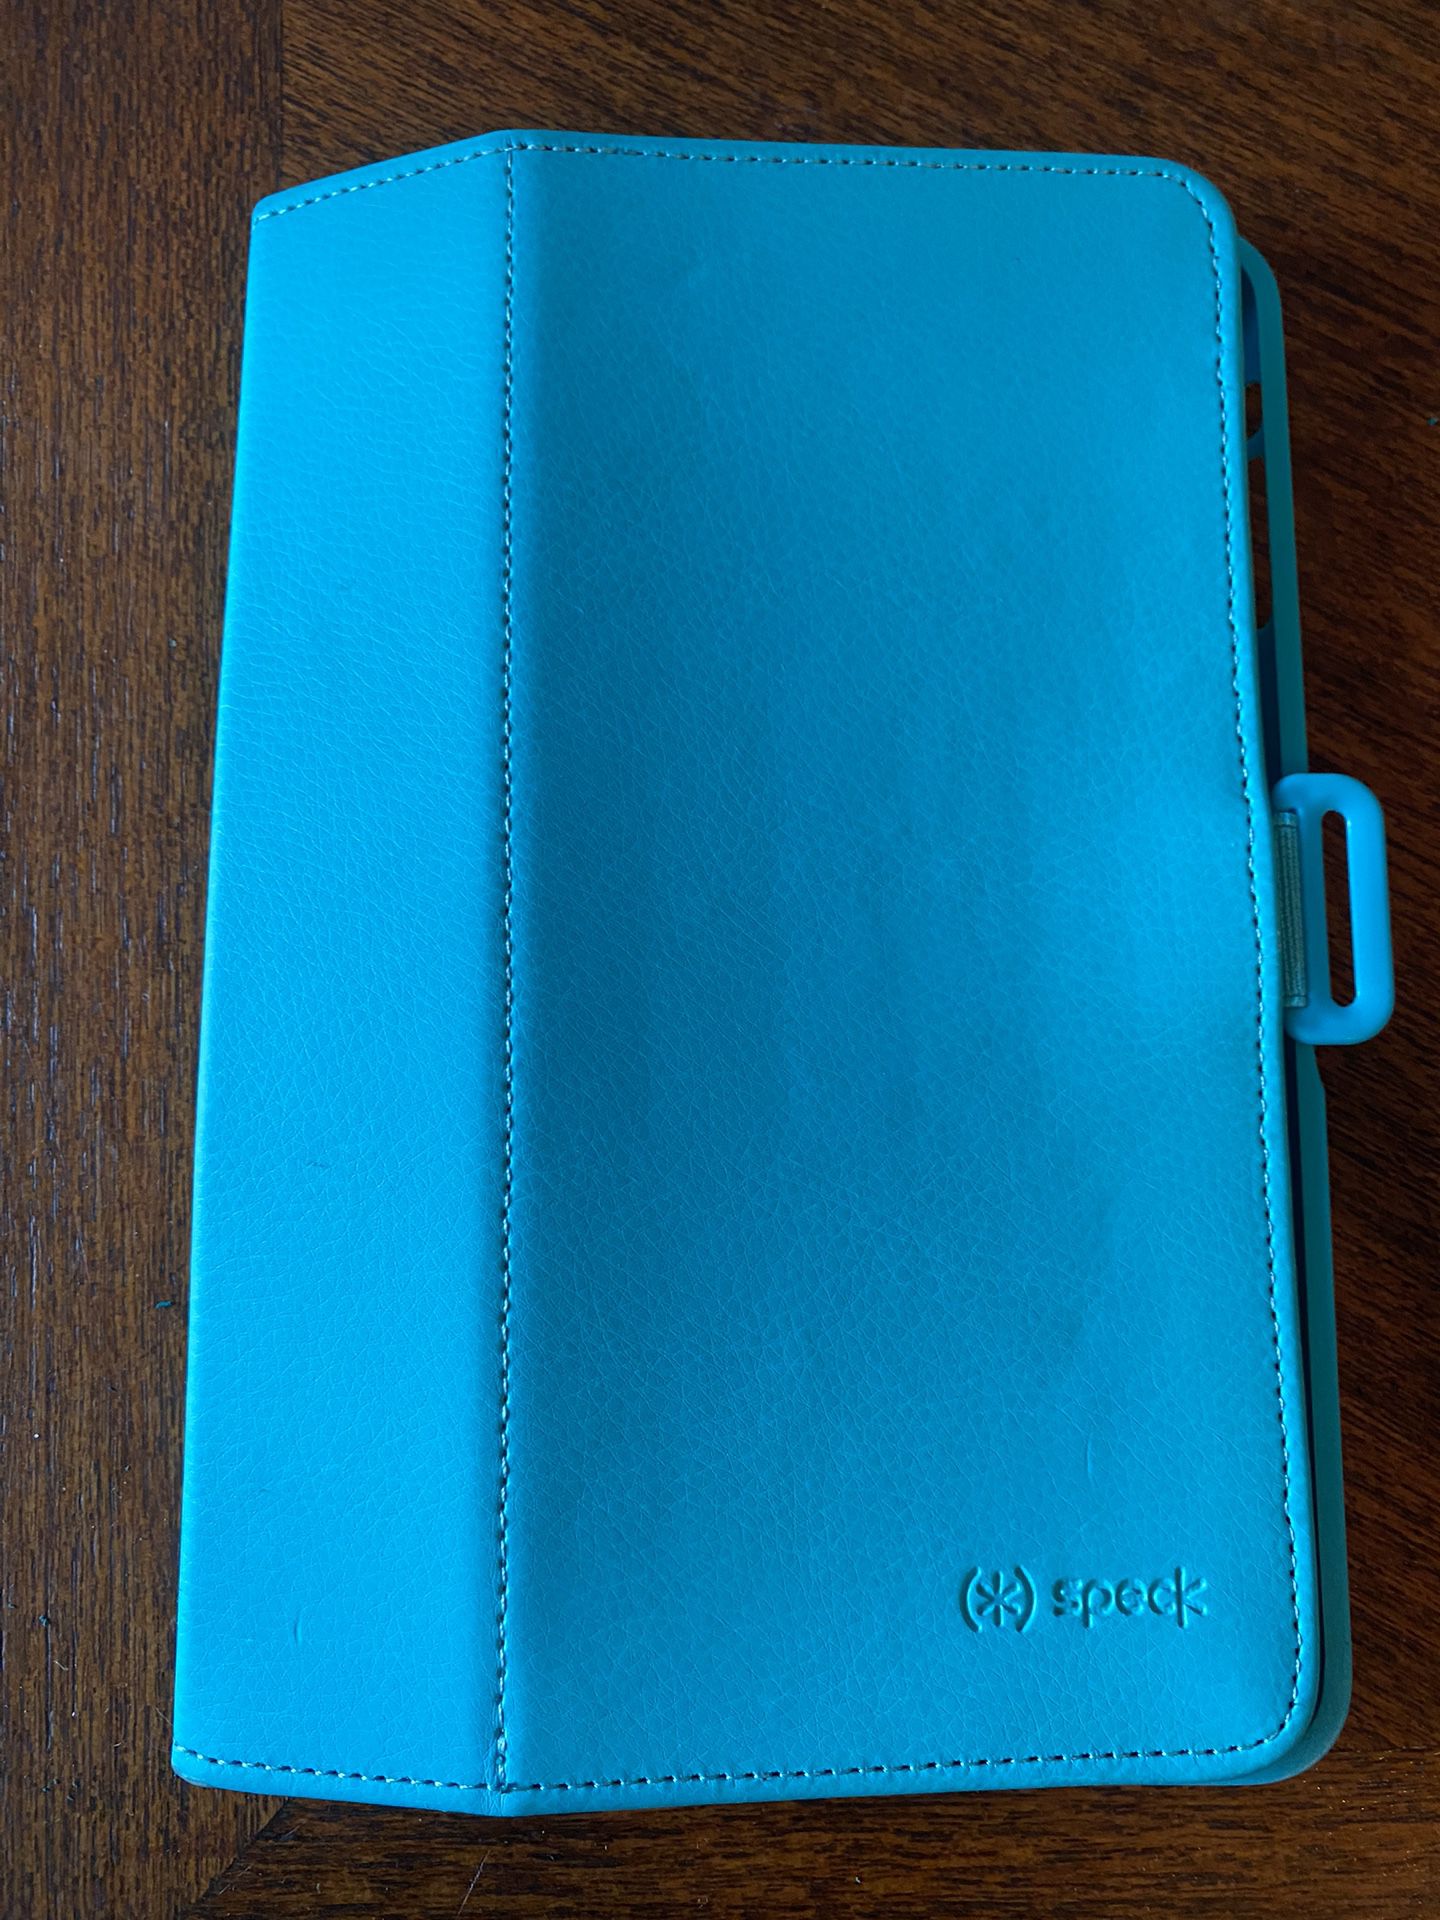 Speck Brand Tablet or Kindle Cover 